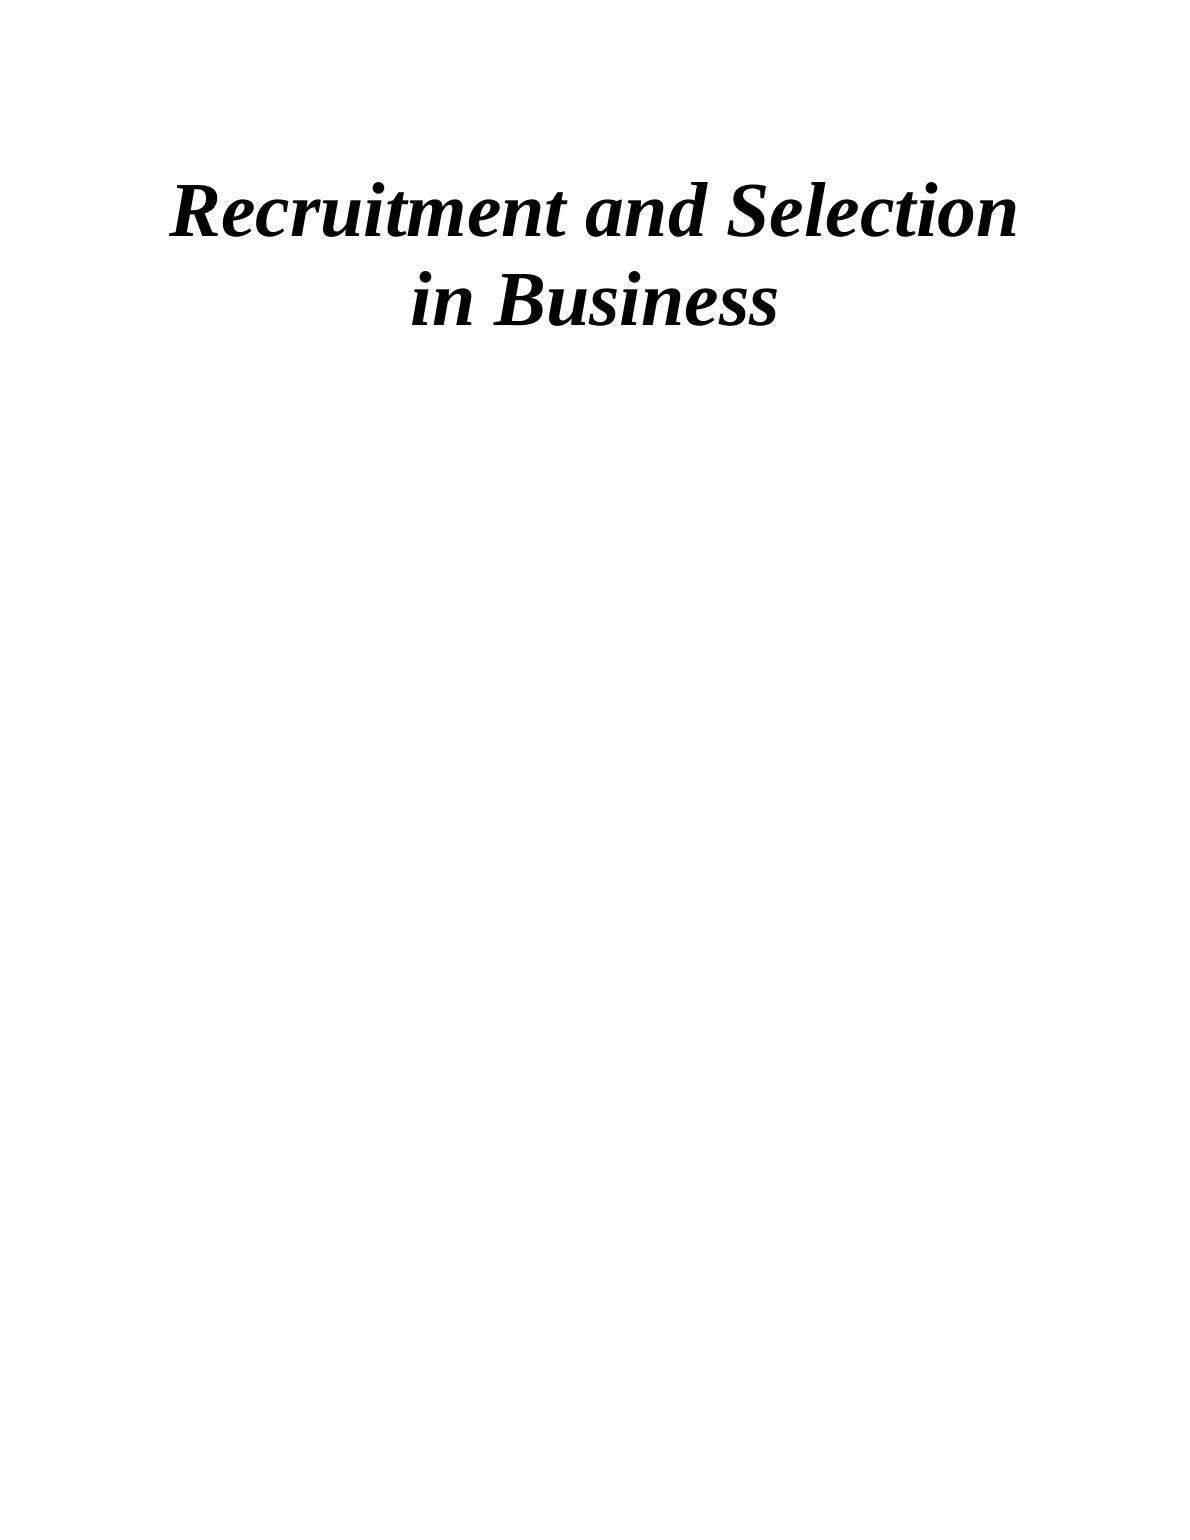 Recruitment and Selection in Business- Assignment_1